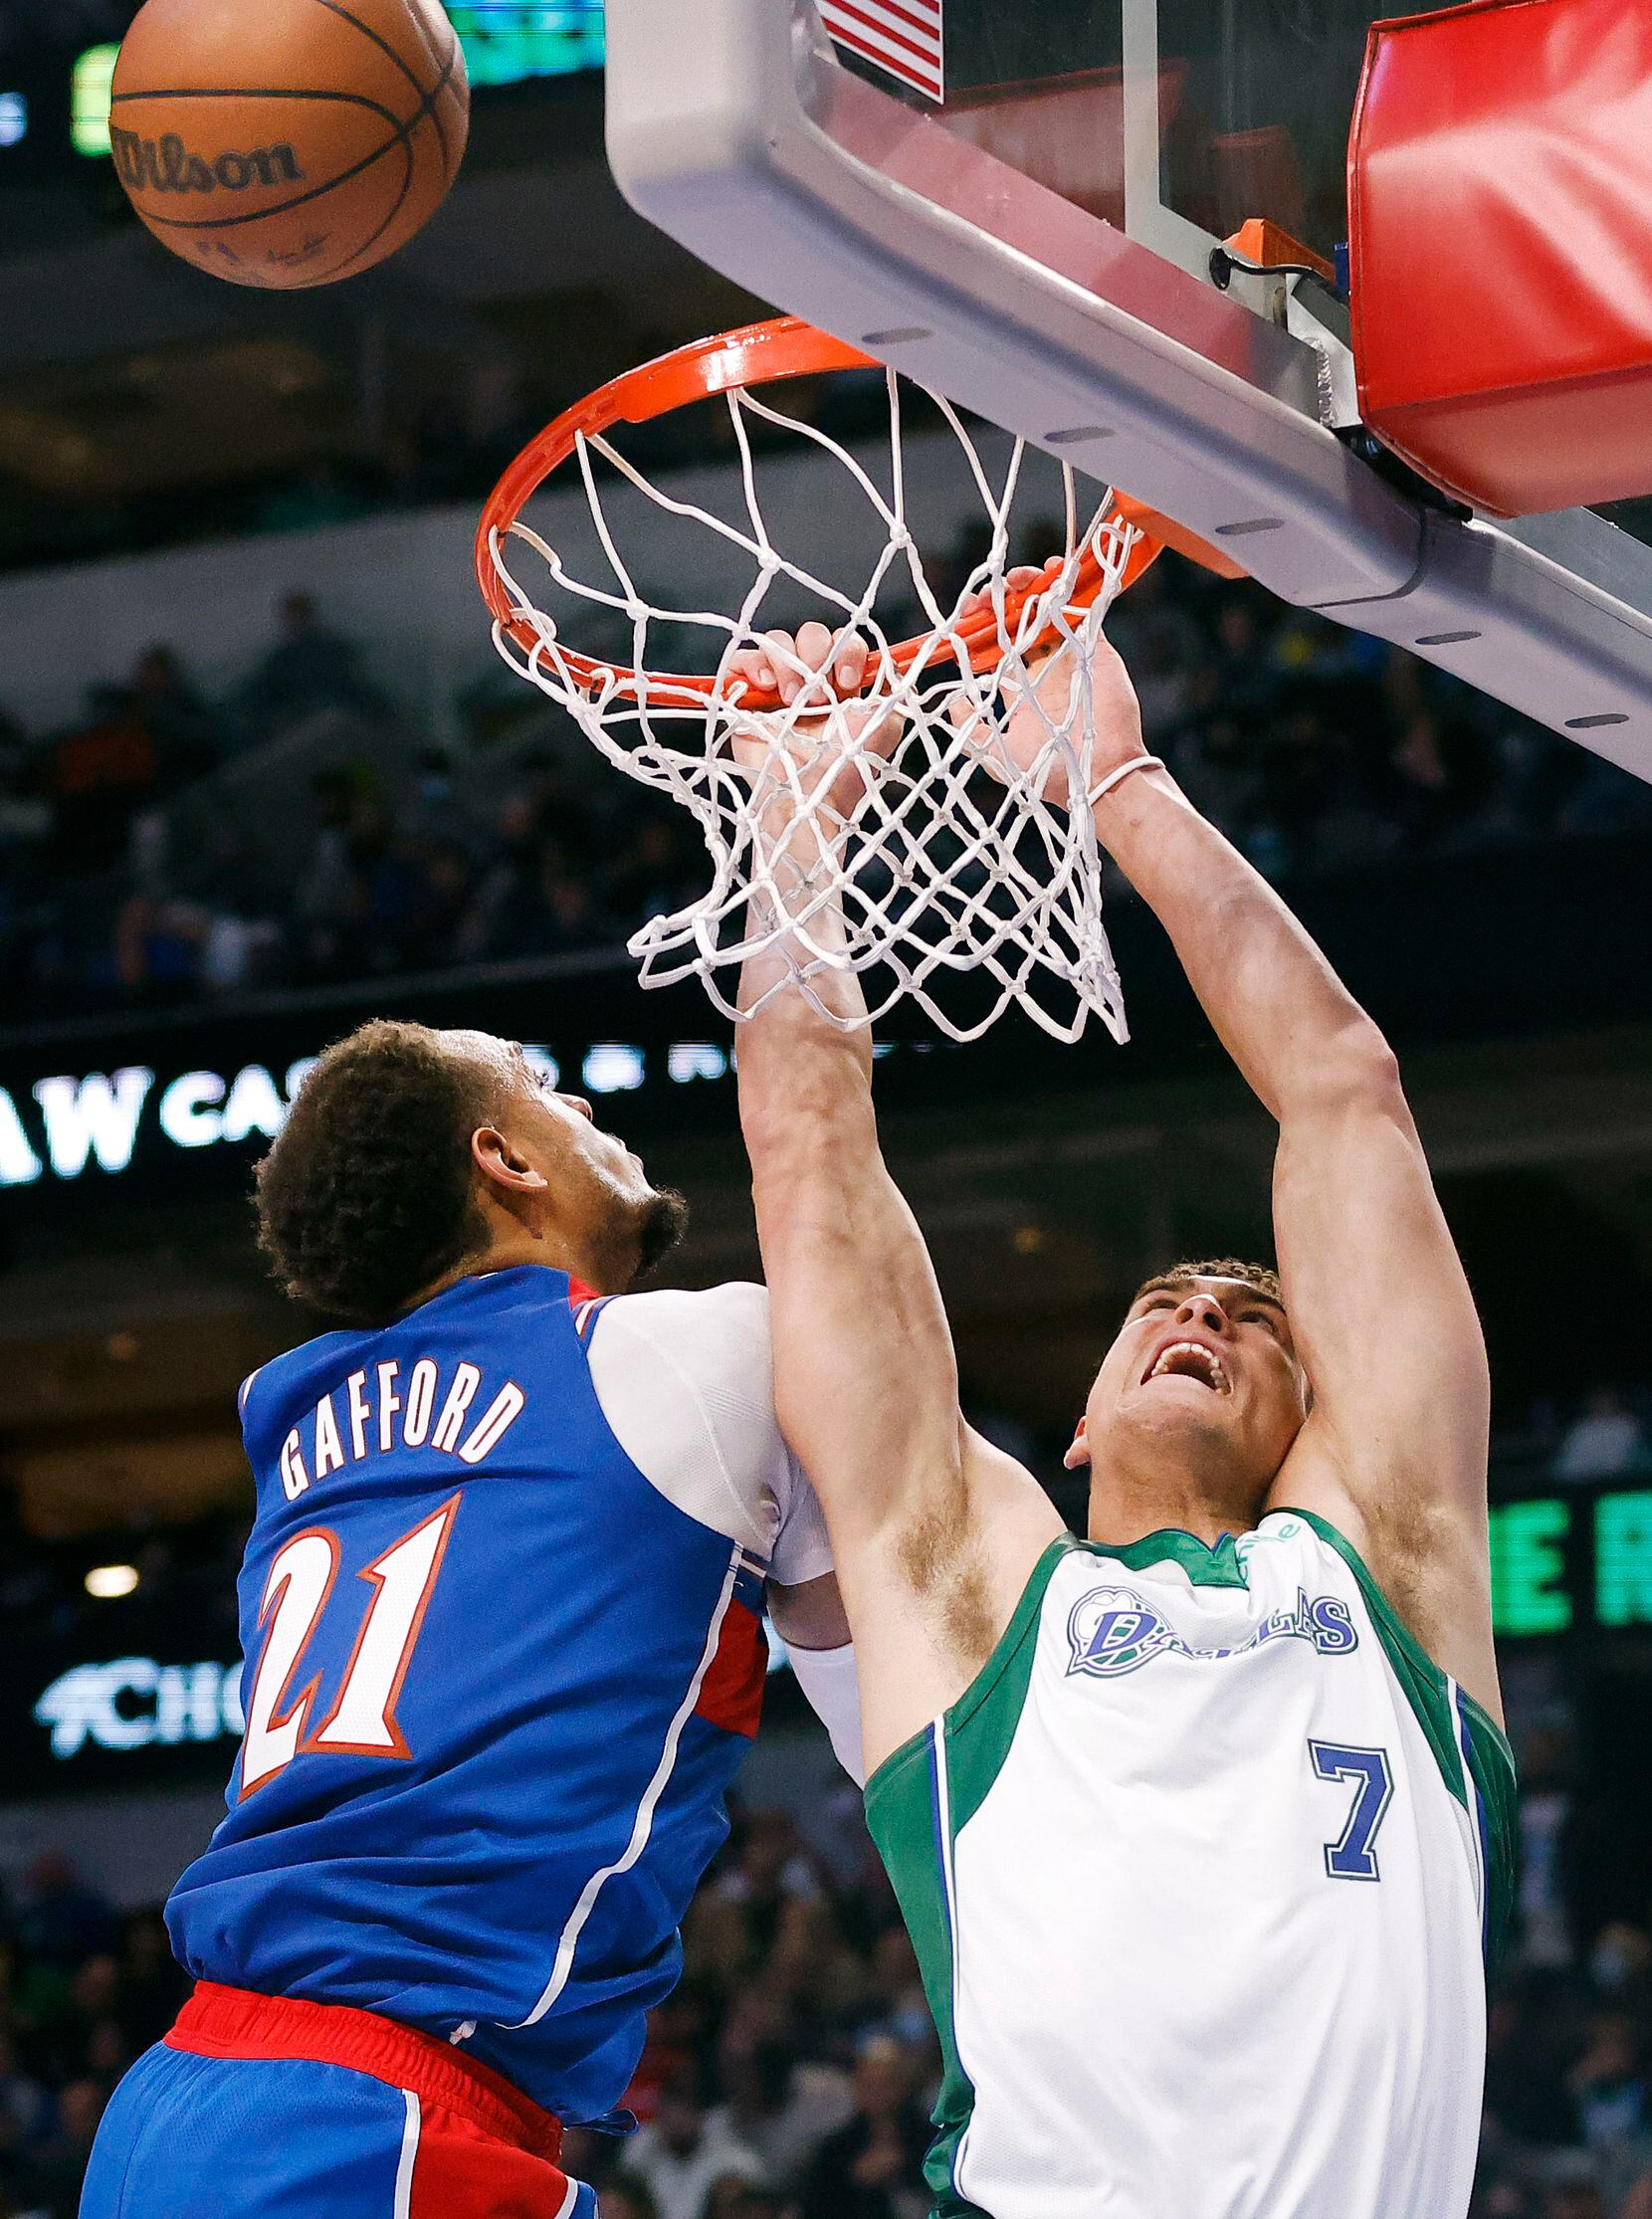 Dallas Mavericks center Dwight Powell (7) misses a slam dunk as Washington Wizards center Daniel Gafford (21) defends during the third quarter at the American Airlines Center in Dallas, November 27, 2021. (Tom Fox/The Dallas Morning News)